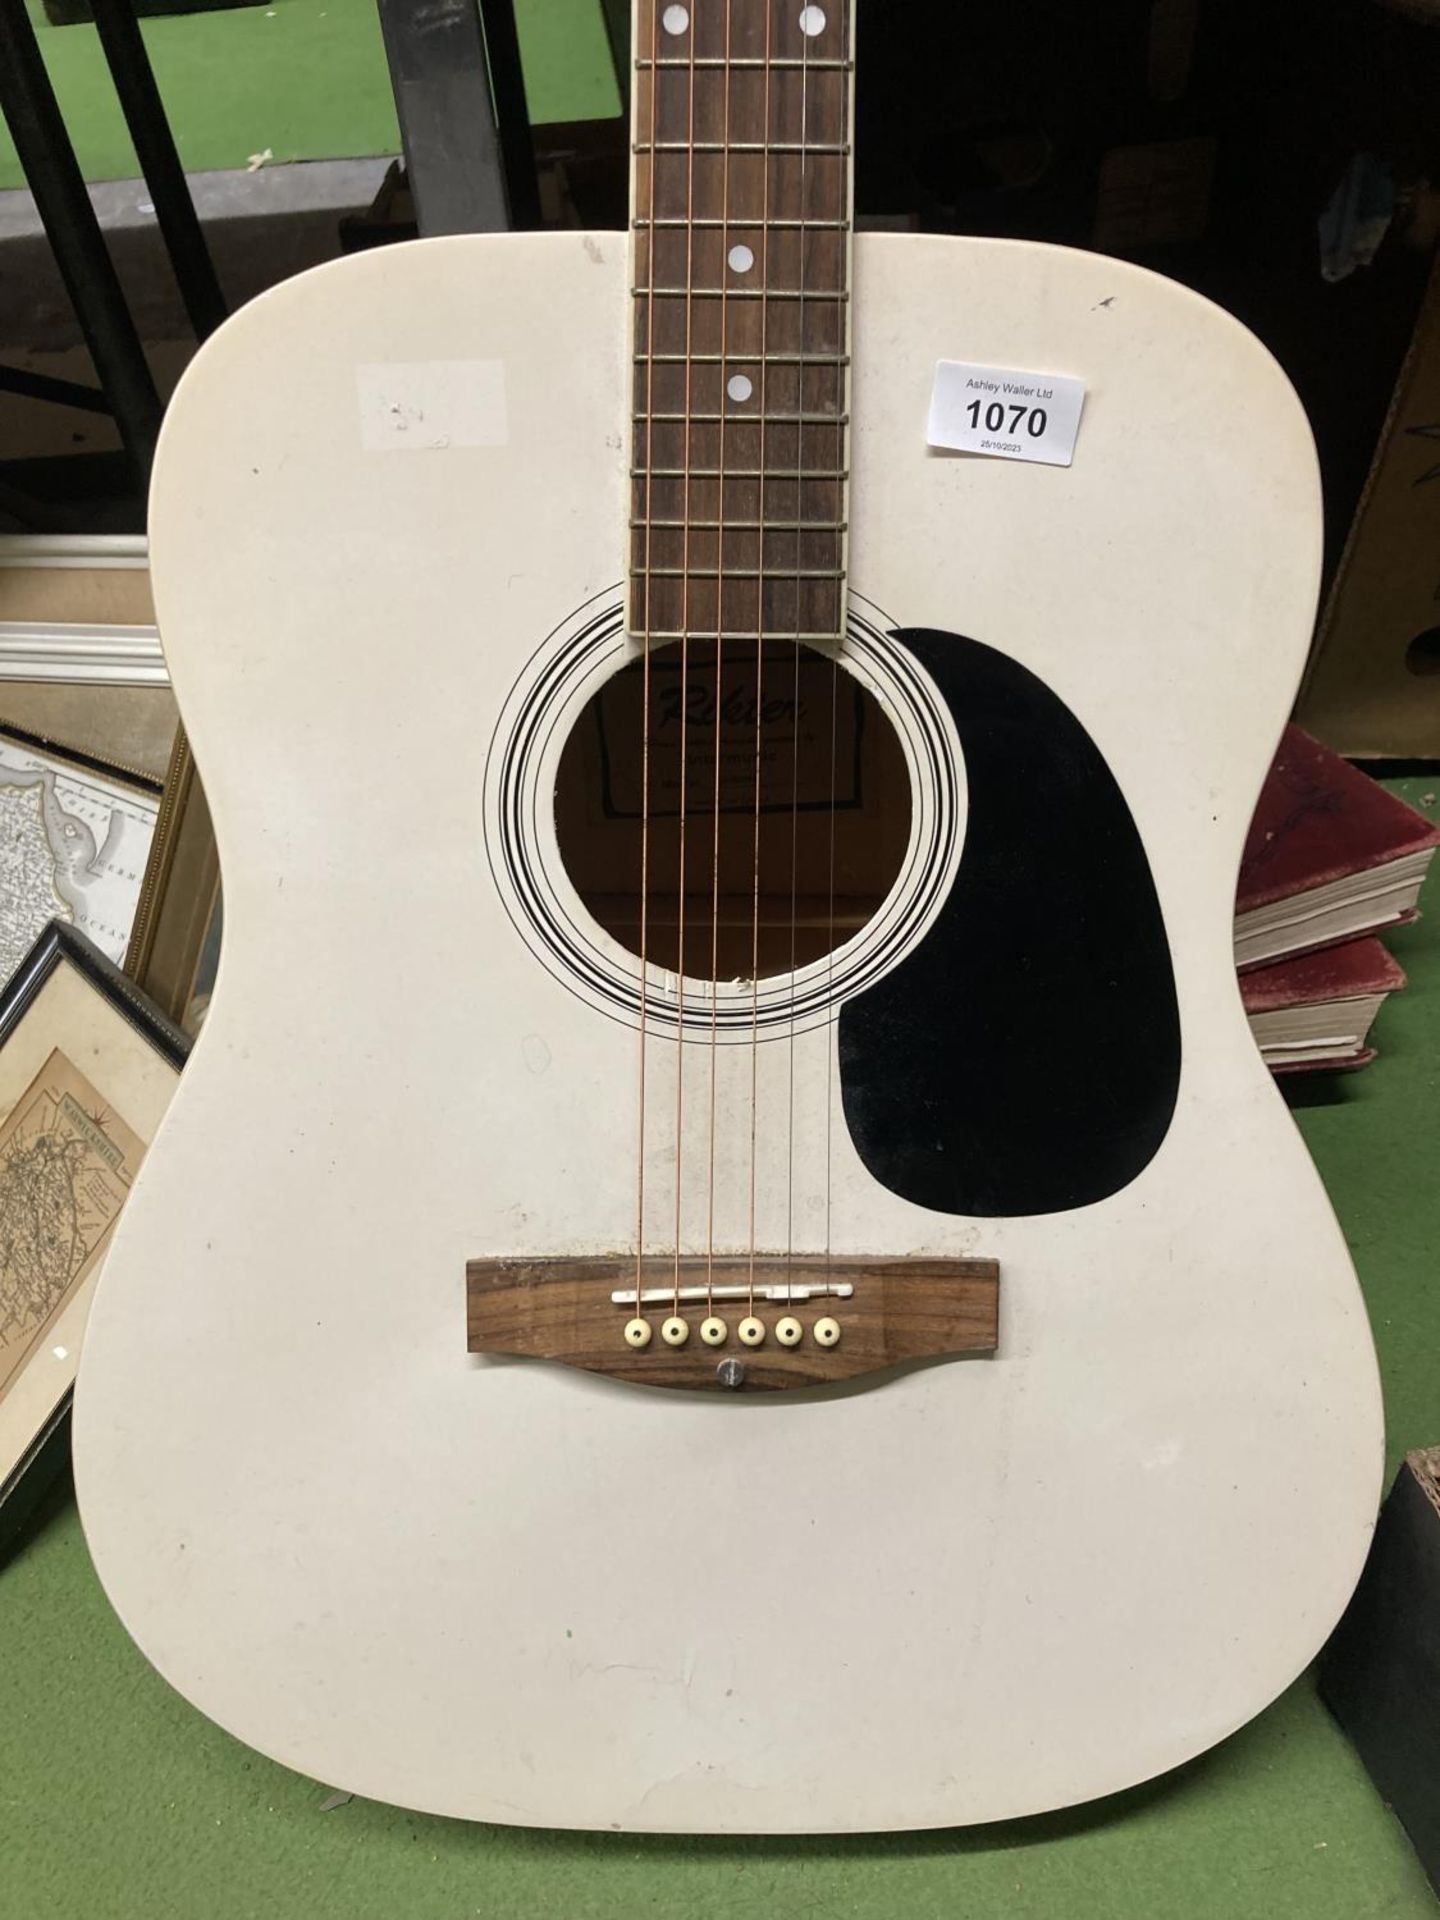 A CREAM COLOURED 'RIKTER' ACOUSTIC GUITAR - Image 2 of 3